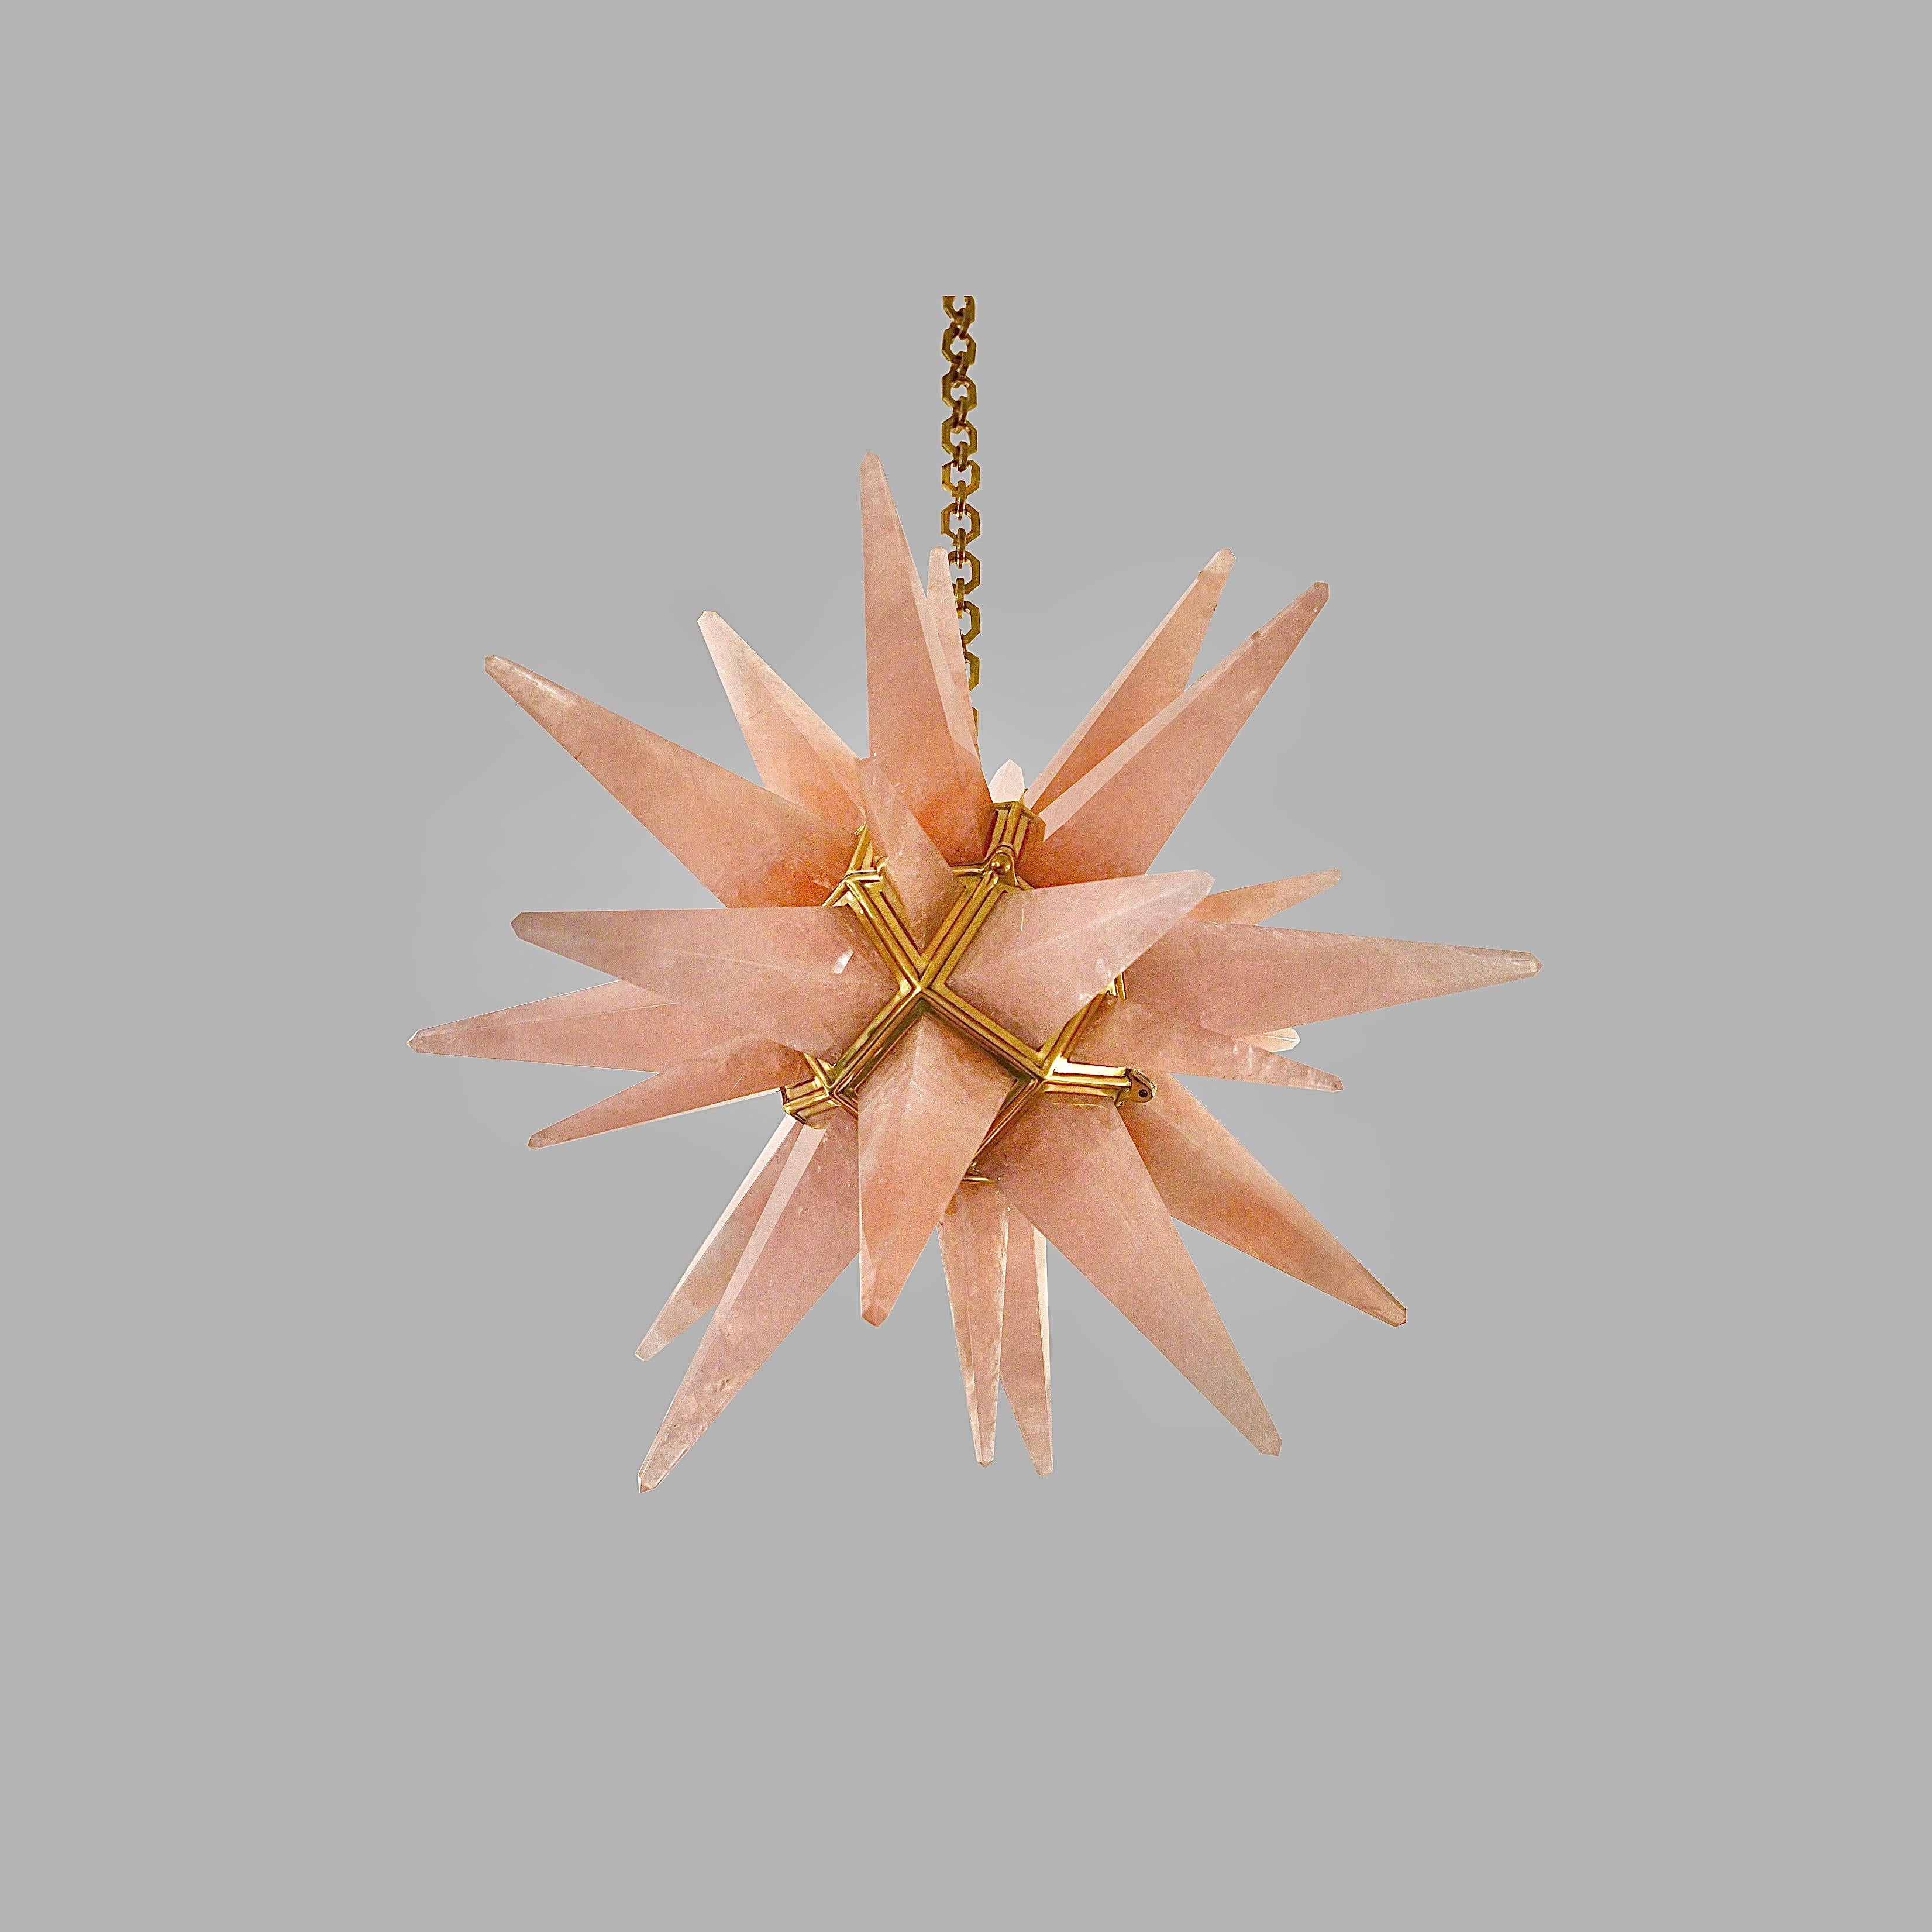 Pink rock crystal star chandelier with polish brass frame,Created by Phoenix Gallery, NYC.
Two candlelabra socket installed. Use two 75 watts LED candelabra lightbulbs.

Light bulb supplied.

Custom size and metal finish upon request.